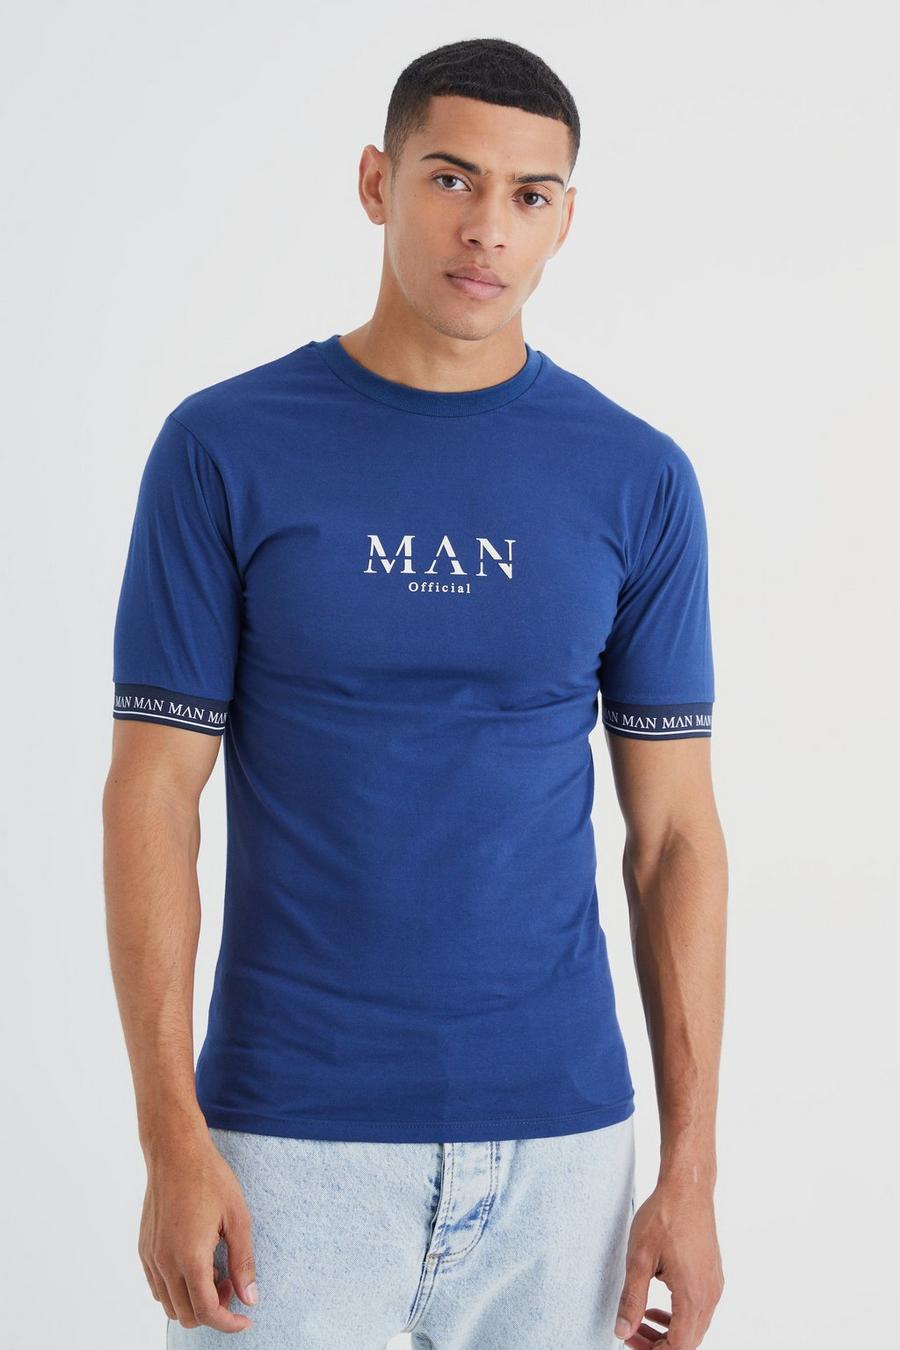 Muscle-Fit Man Gold T-Shirt, Navy